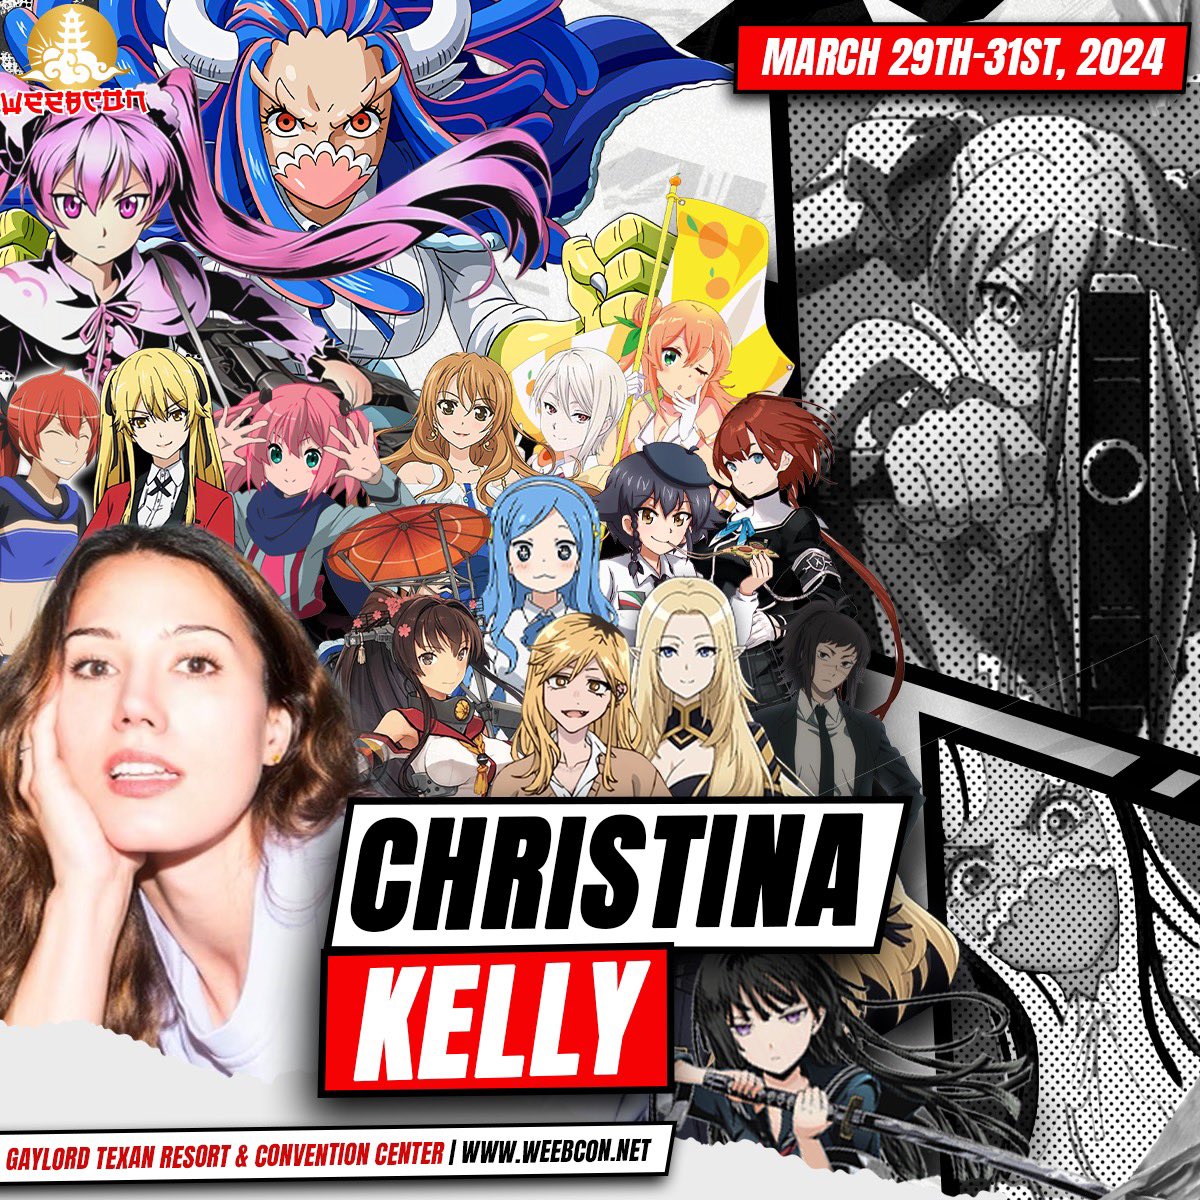 ⛅️CELEBRITY GUEST⛅️ Have you ever met someone part Pachycephhlosaurus? Please welcome Christina Kelly to our guest list. Christina will be in attendance all three days of the show. A few tickets are on pace to sell out so be sure to secure your spot 🎟️ ⛅️